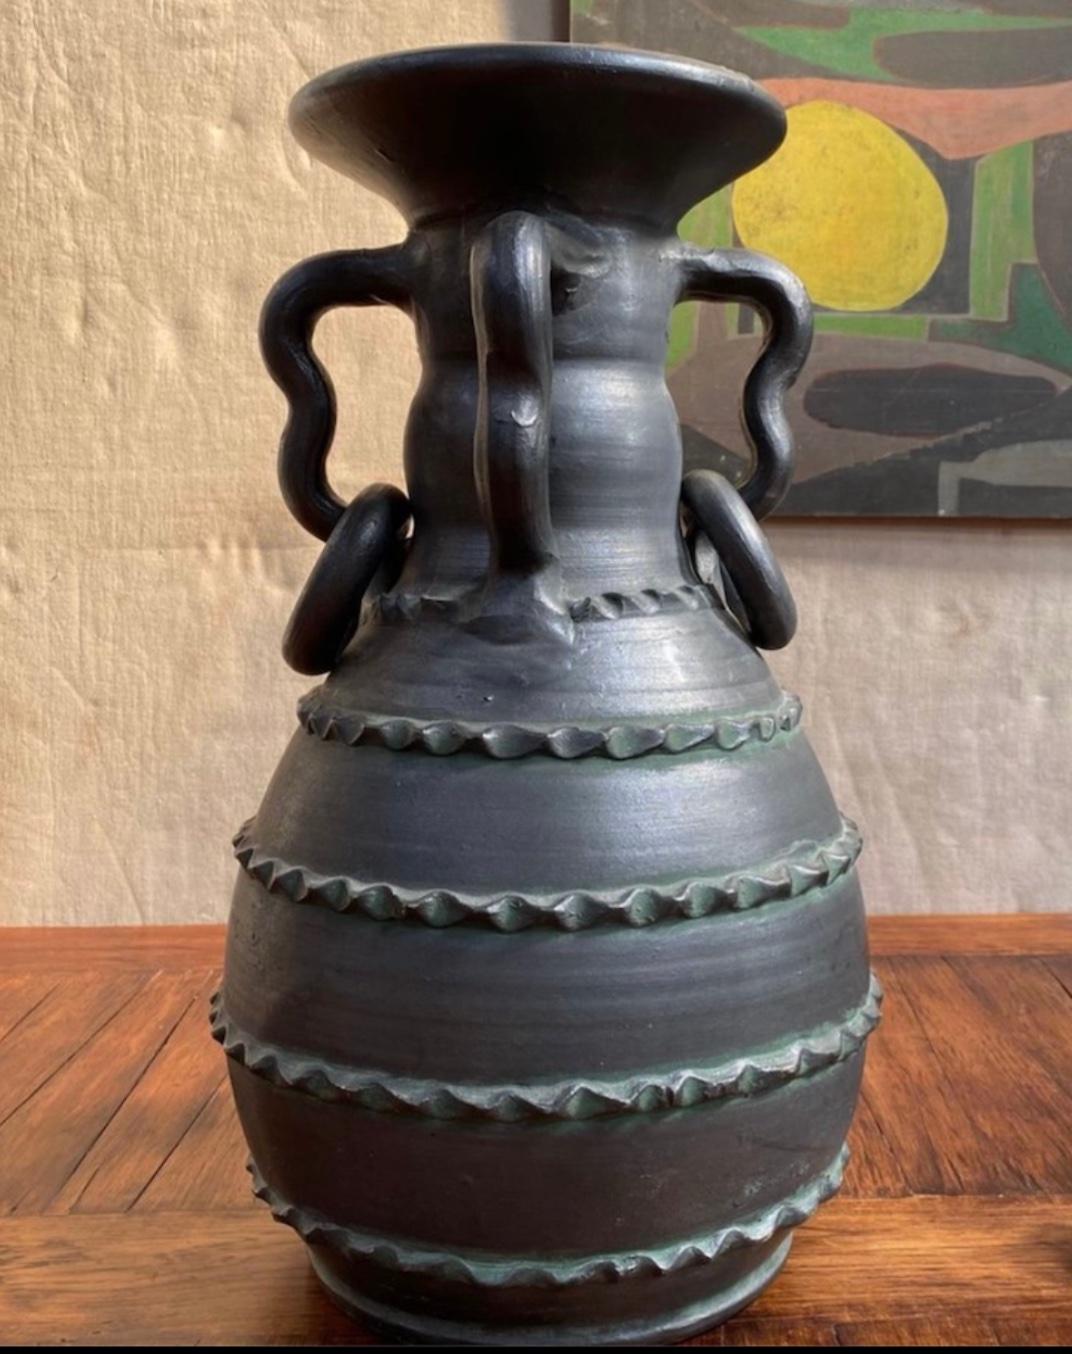 Black stoneware ceramic jar or vase with soft semi-matte finish and whimsical decorative accenting, from 1970s Spain.

Spain, circa 1970

Dimensions: 22H x 14D